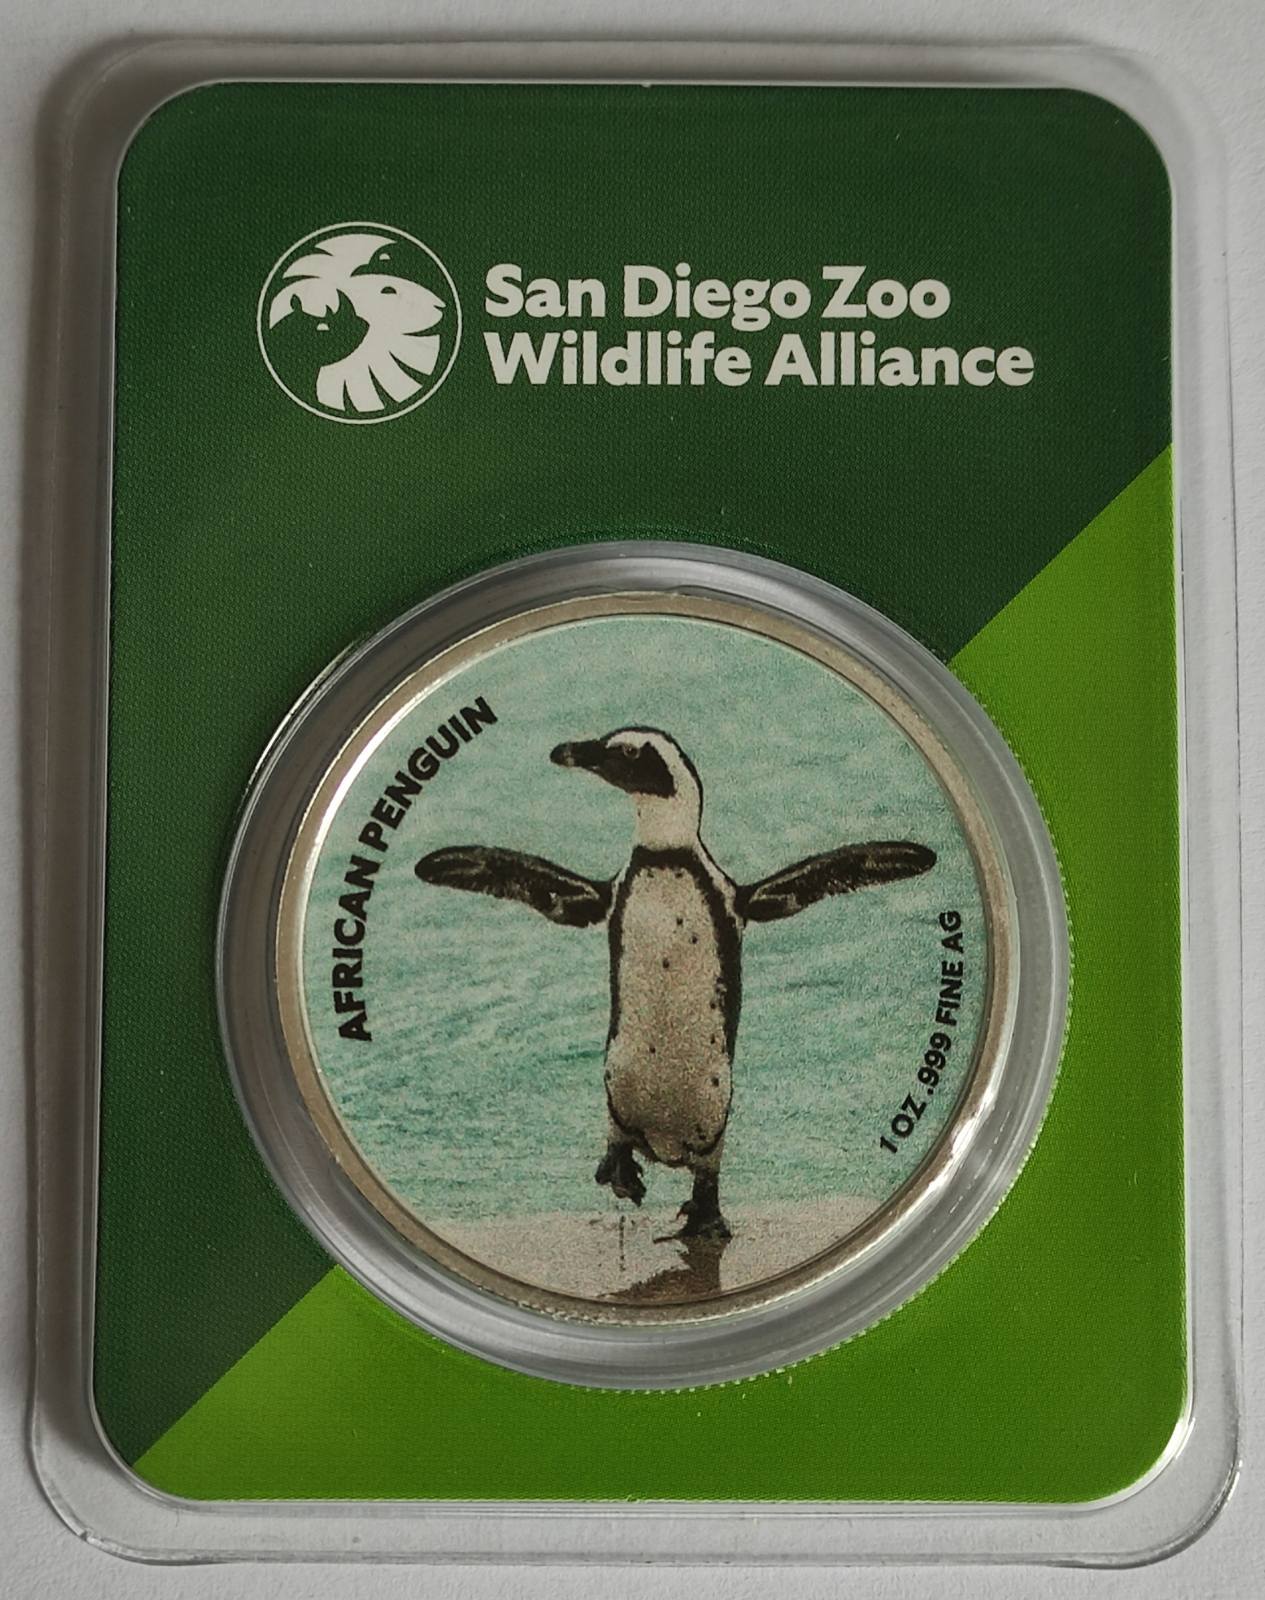 San Diego Zoo 1 oz Colorized Silver Coin in Tamper-Evident Packaging